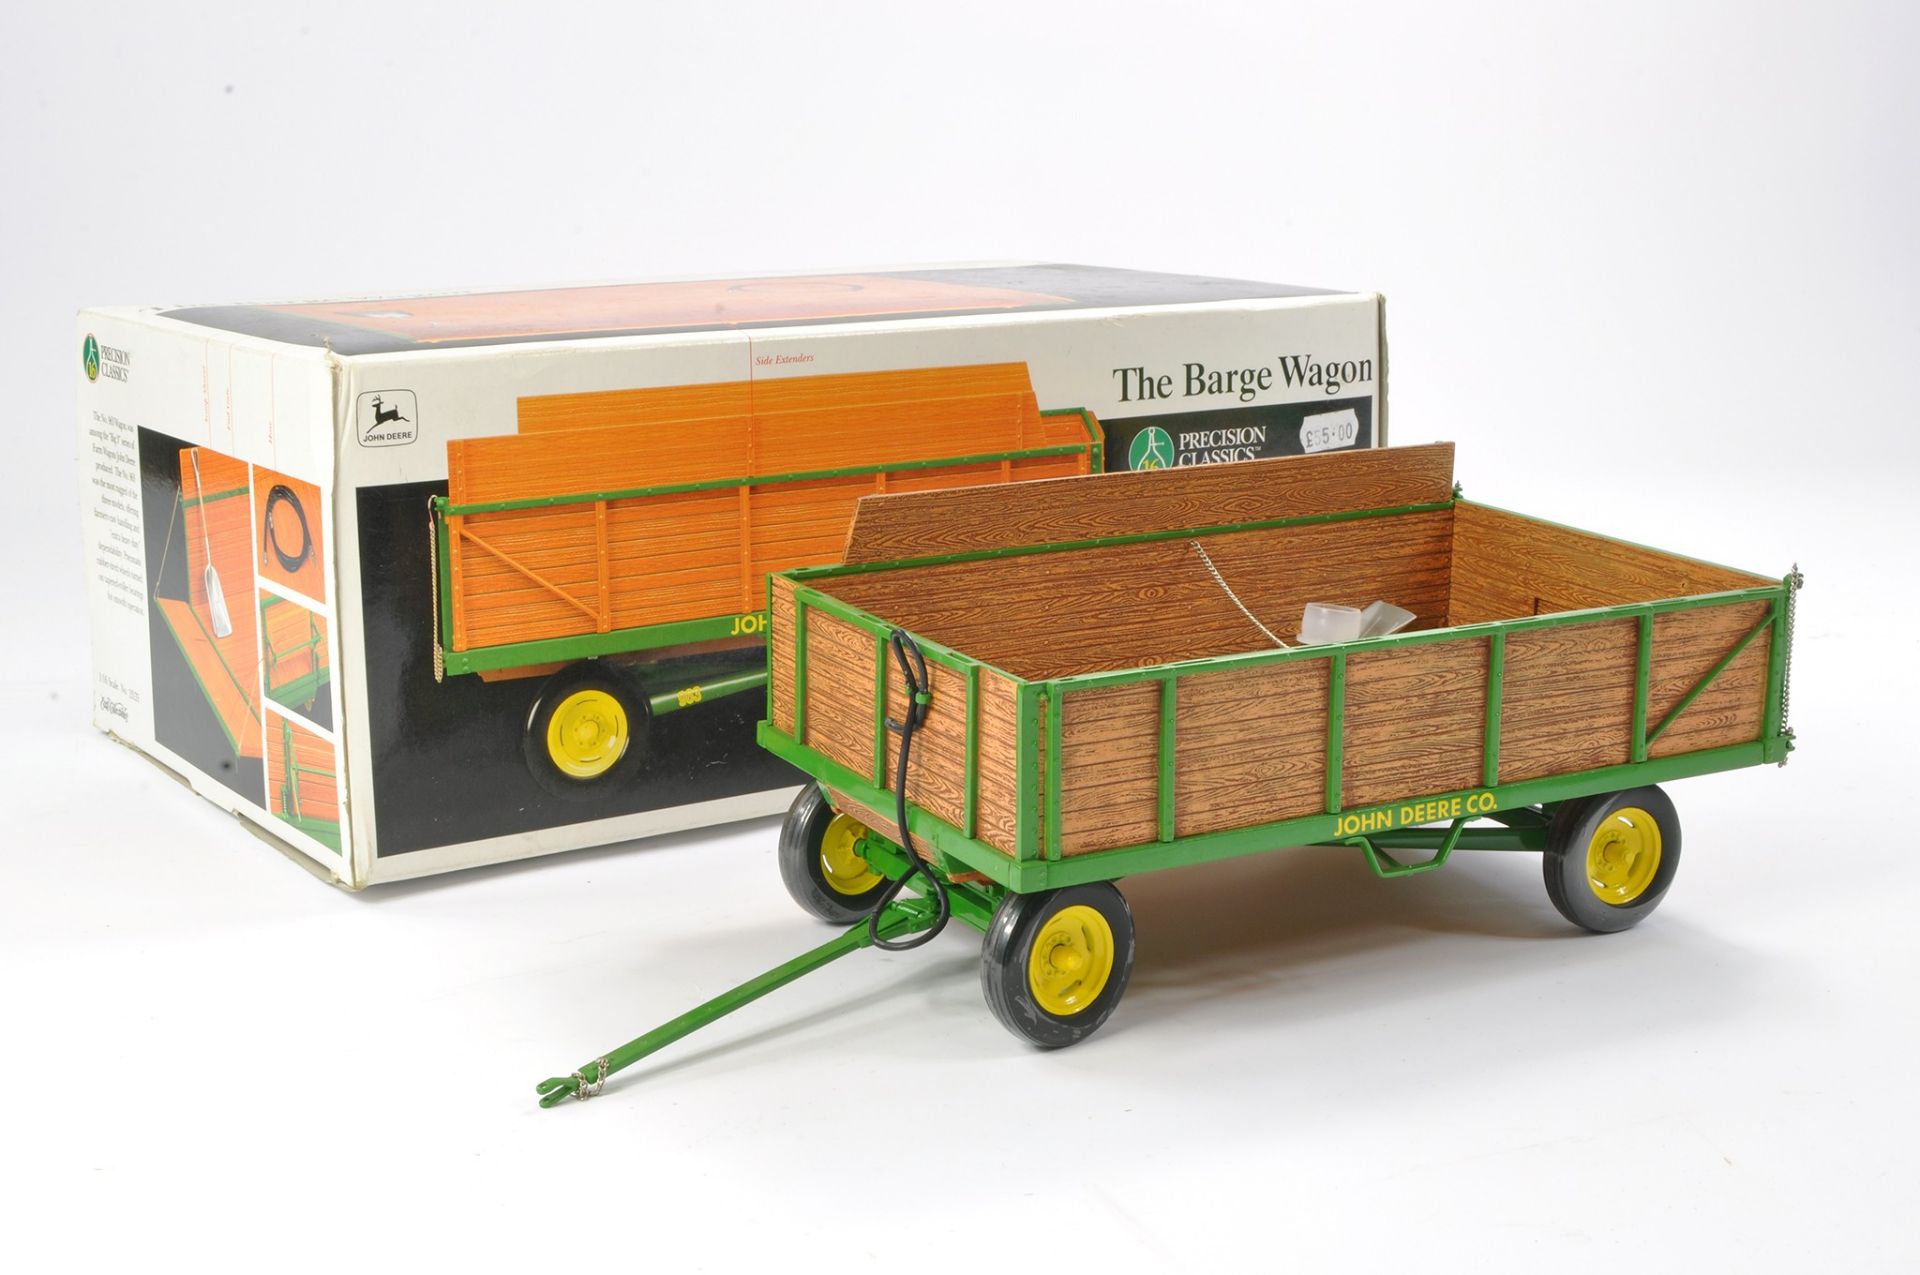 Ertl 1/16 Farm Issue comprising John Deere Barge Wagon. Precision Series. Has been displayed but